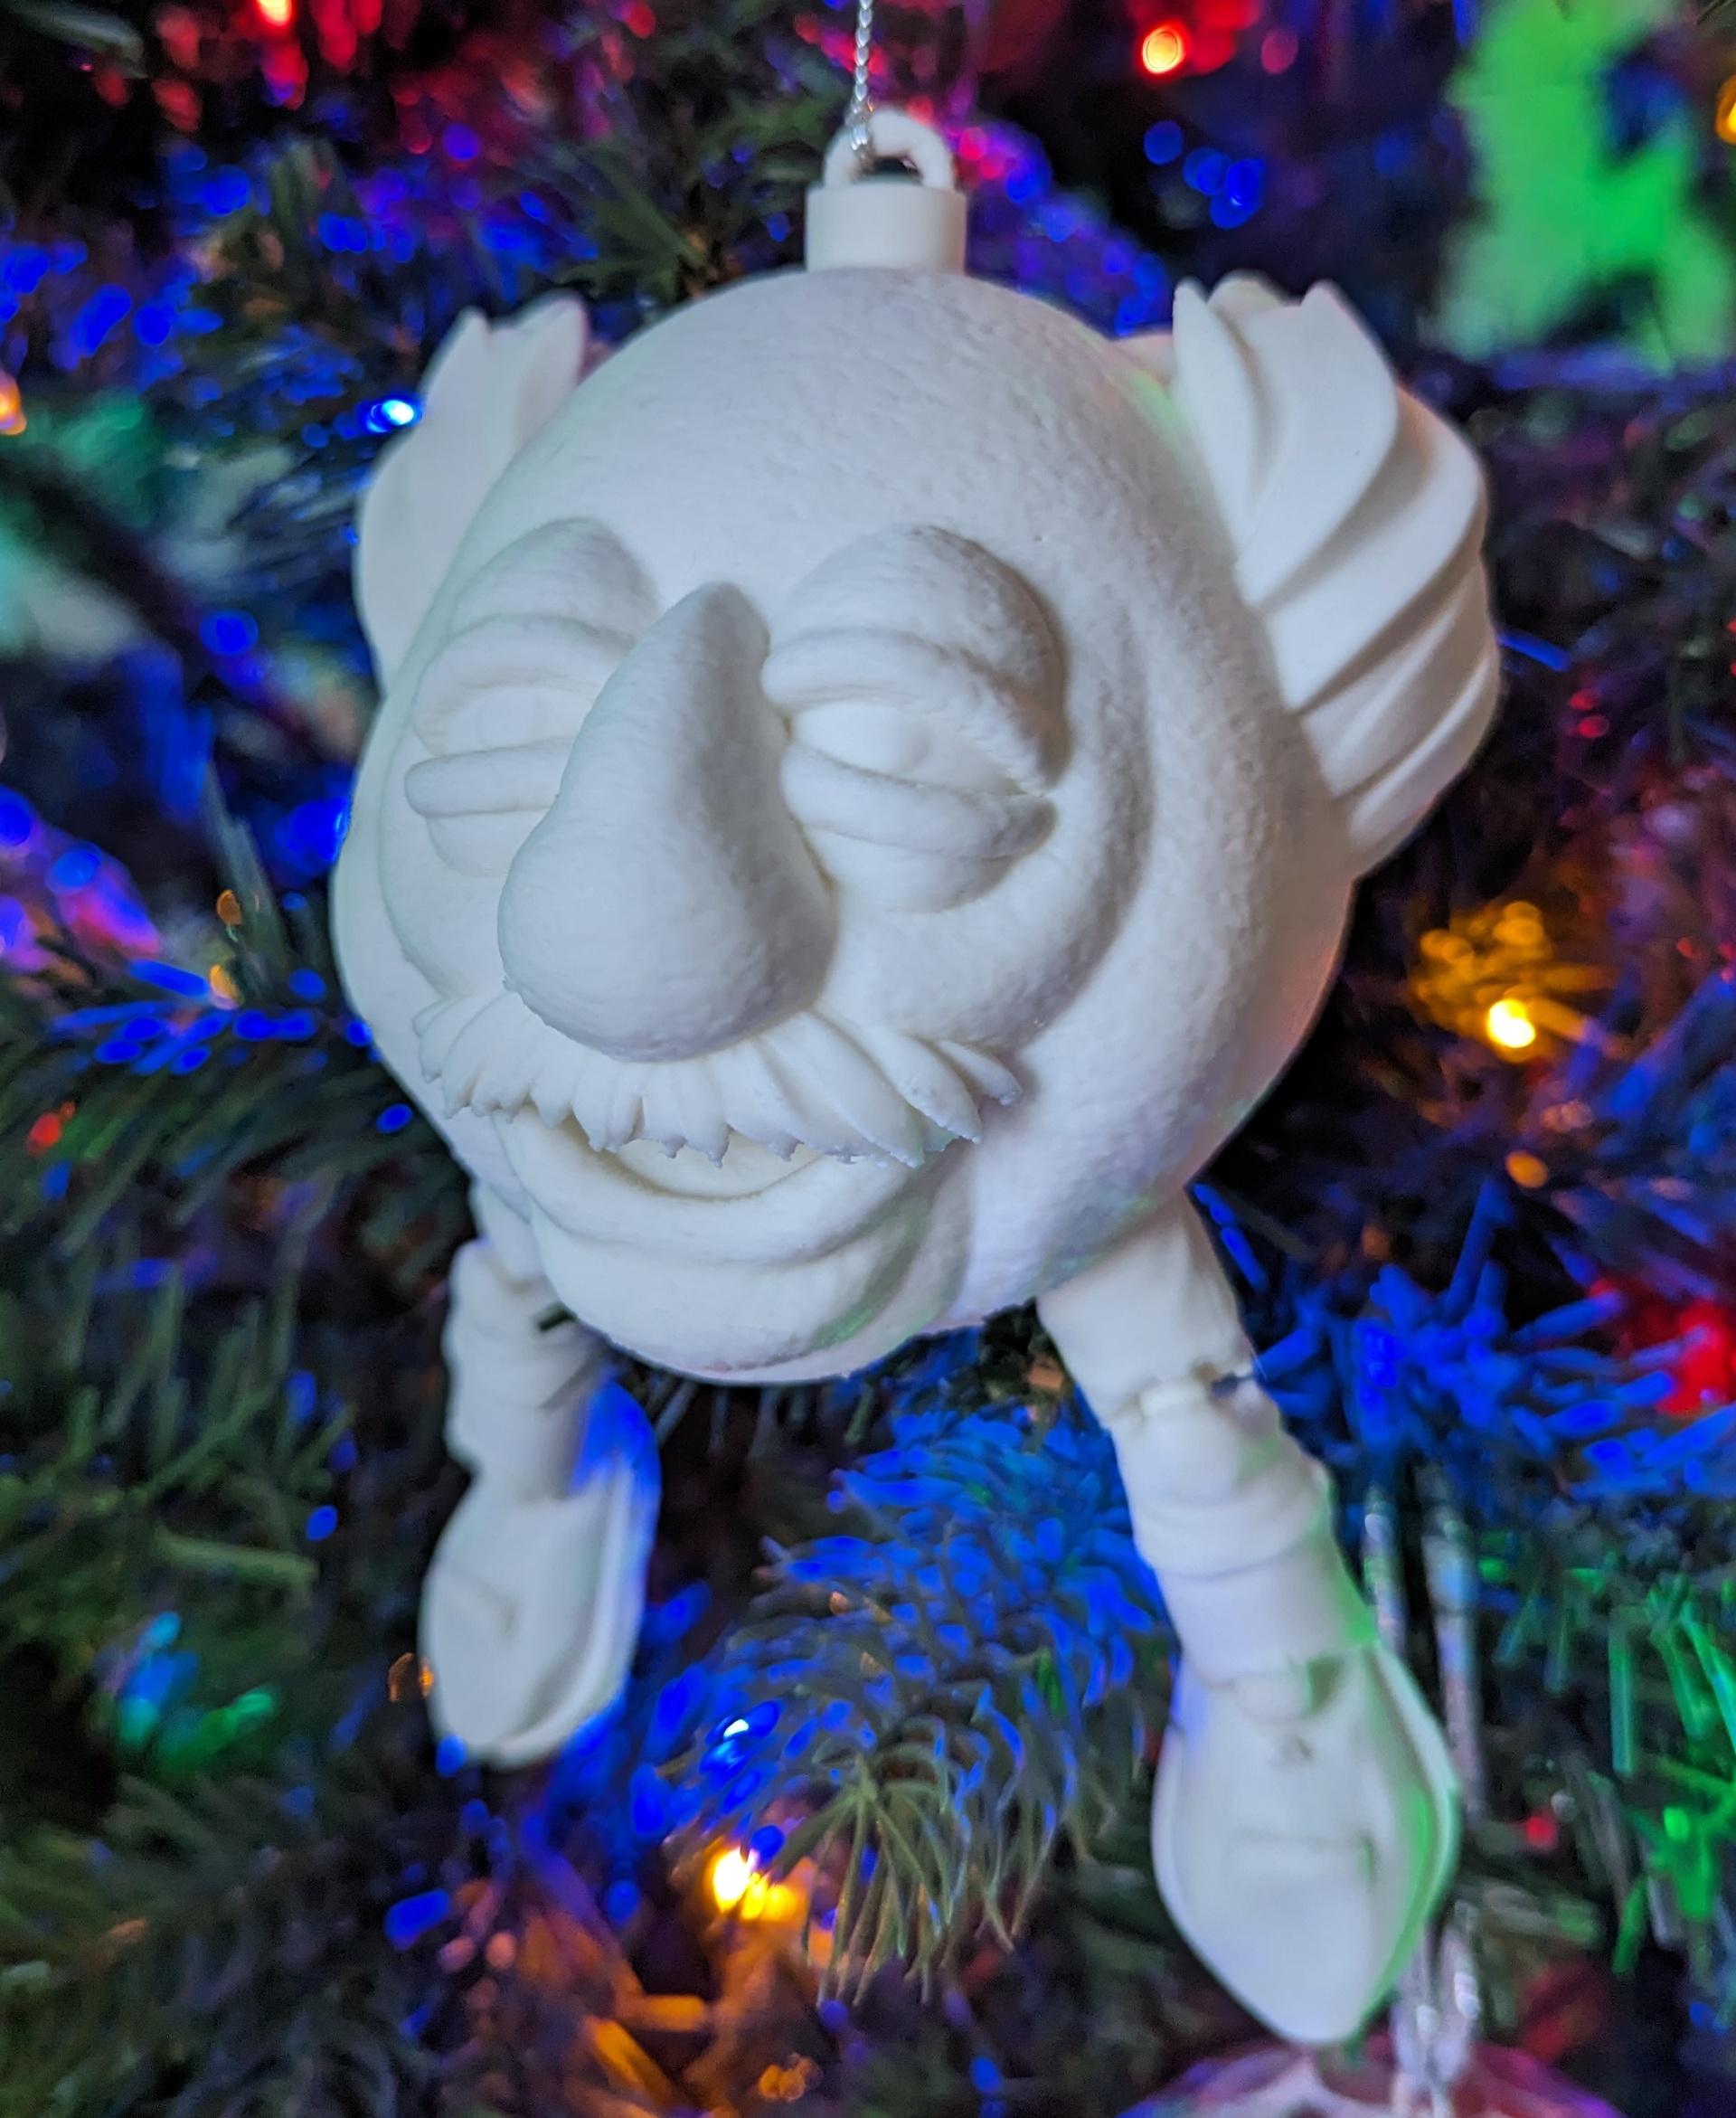 Muppets Robert Marley Dangly-leg Ornament - One of my favourite prints I have done.  Thank you. - 3d model